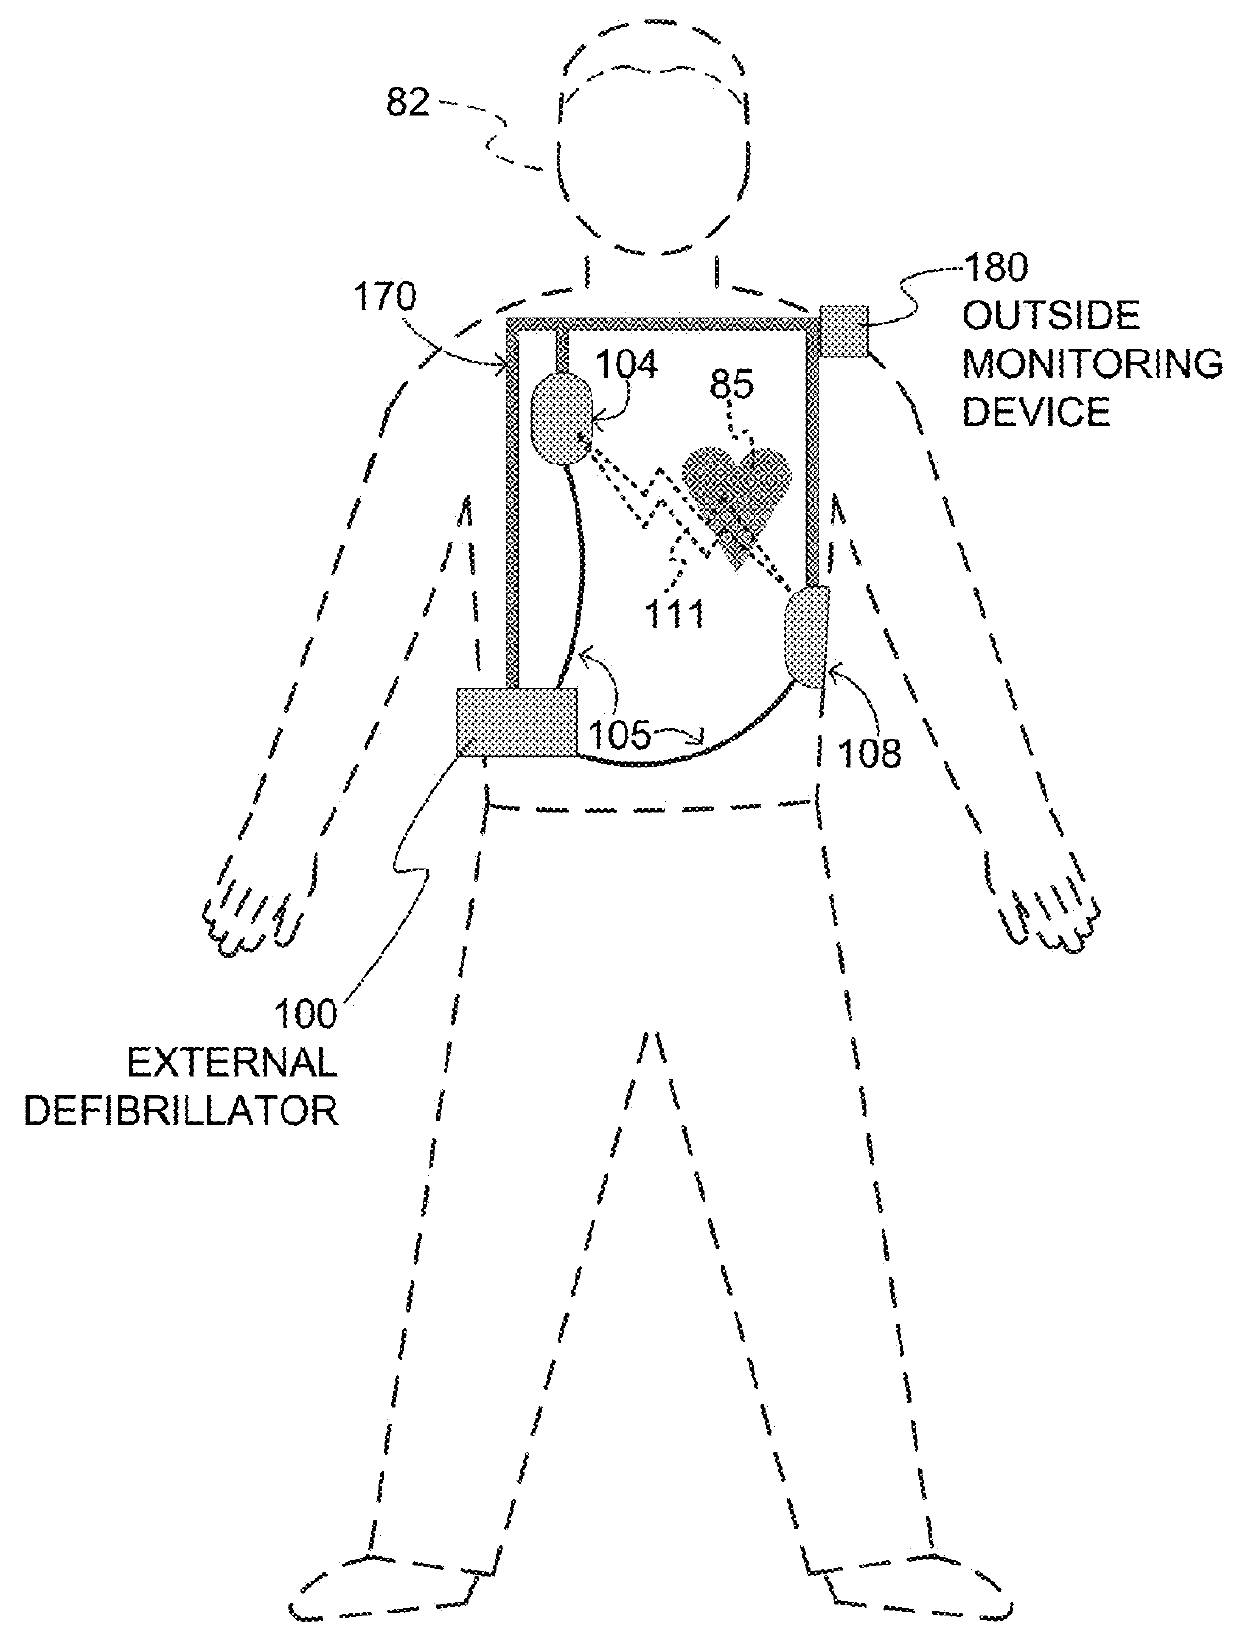 Wearable cardioverter defibrillator (WCD) with power-saving function